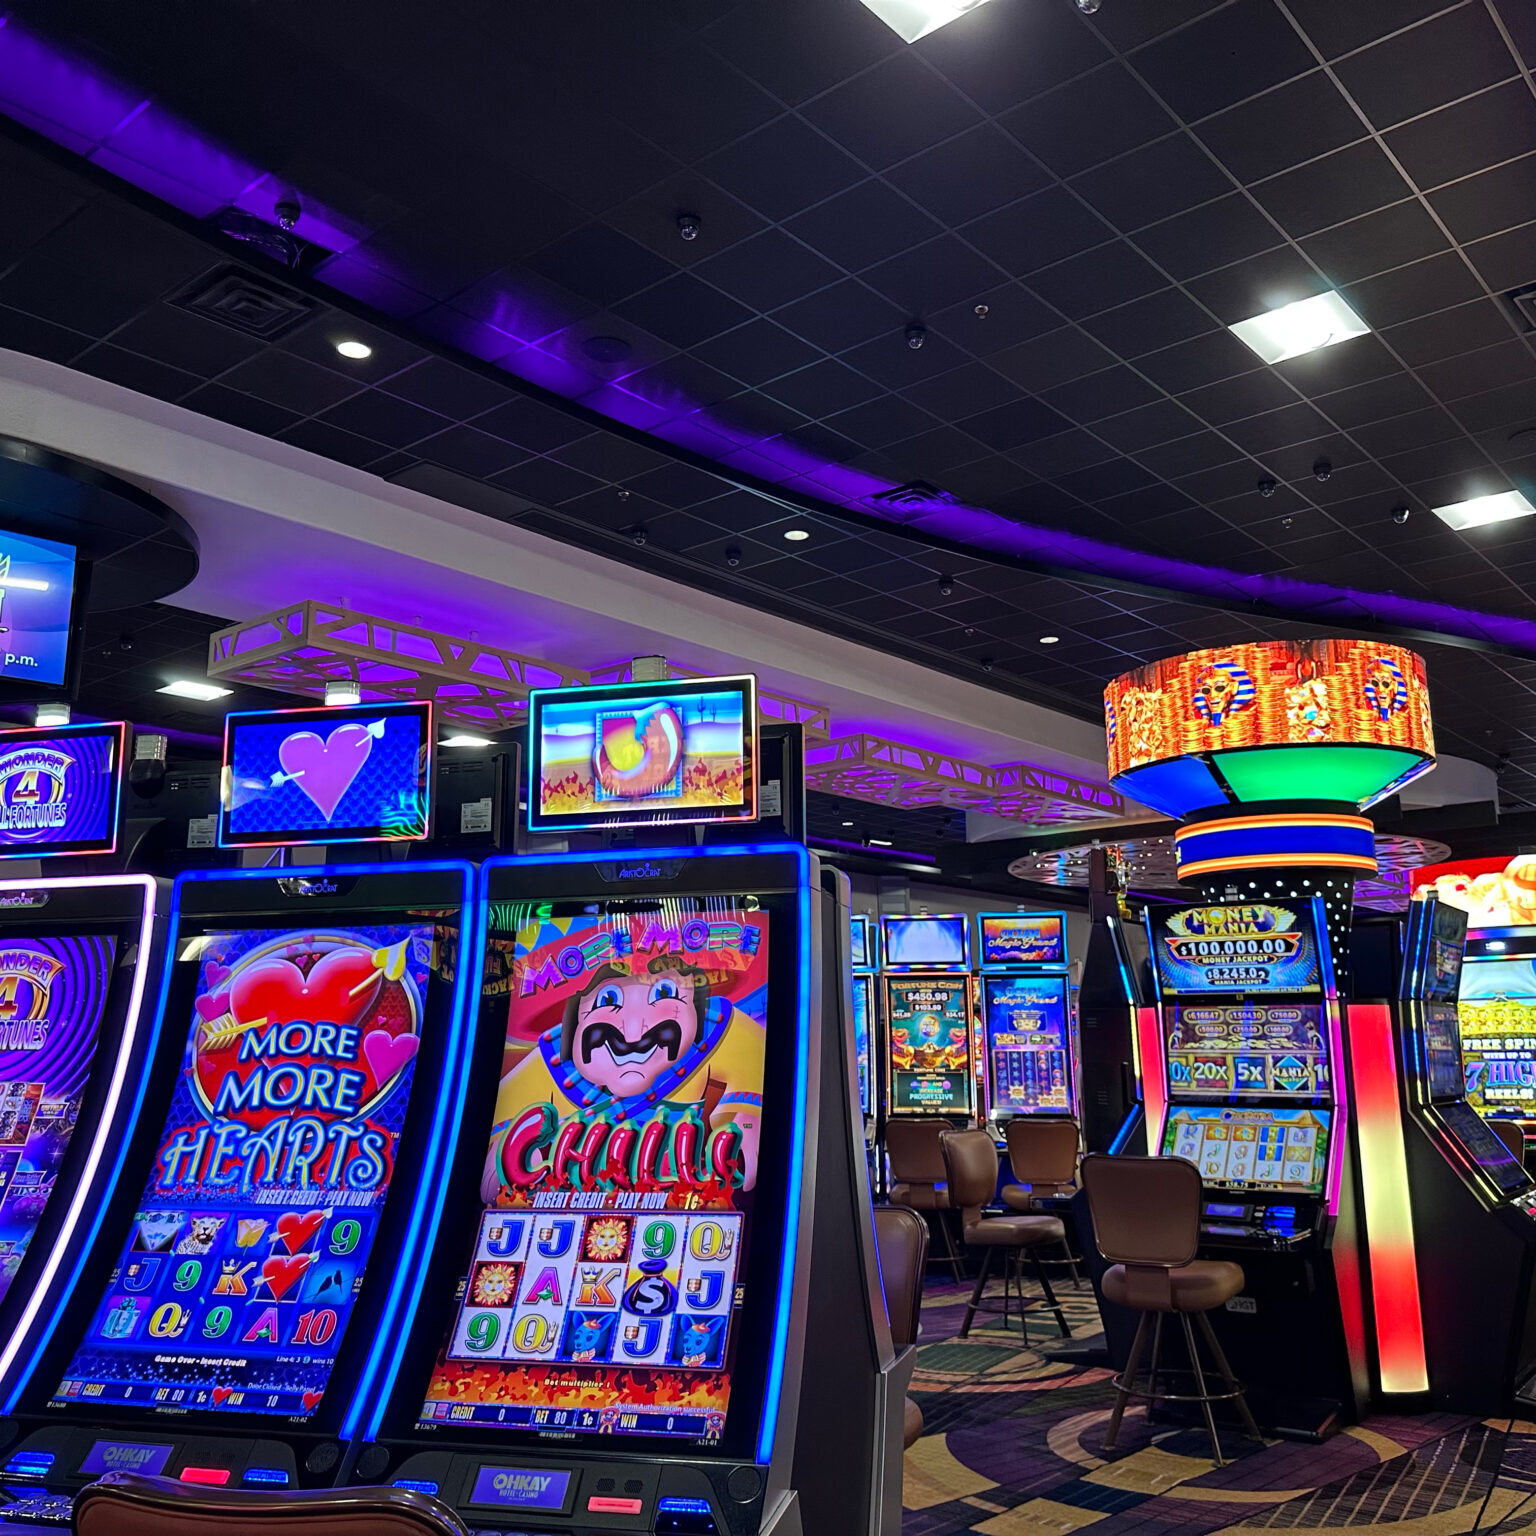 Ohkay Casino offers a plethora of slot machines for guests to enjoy.